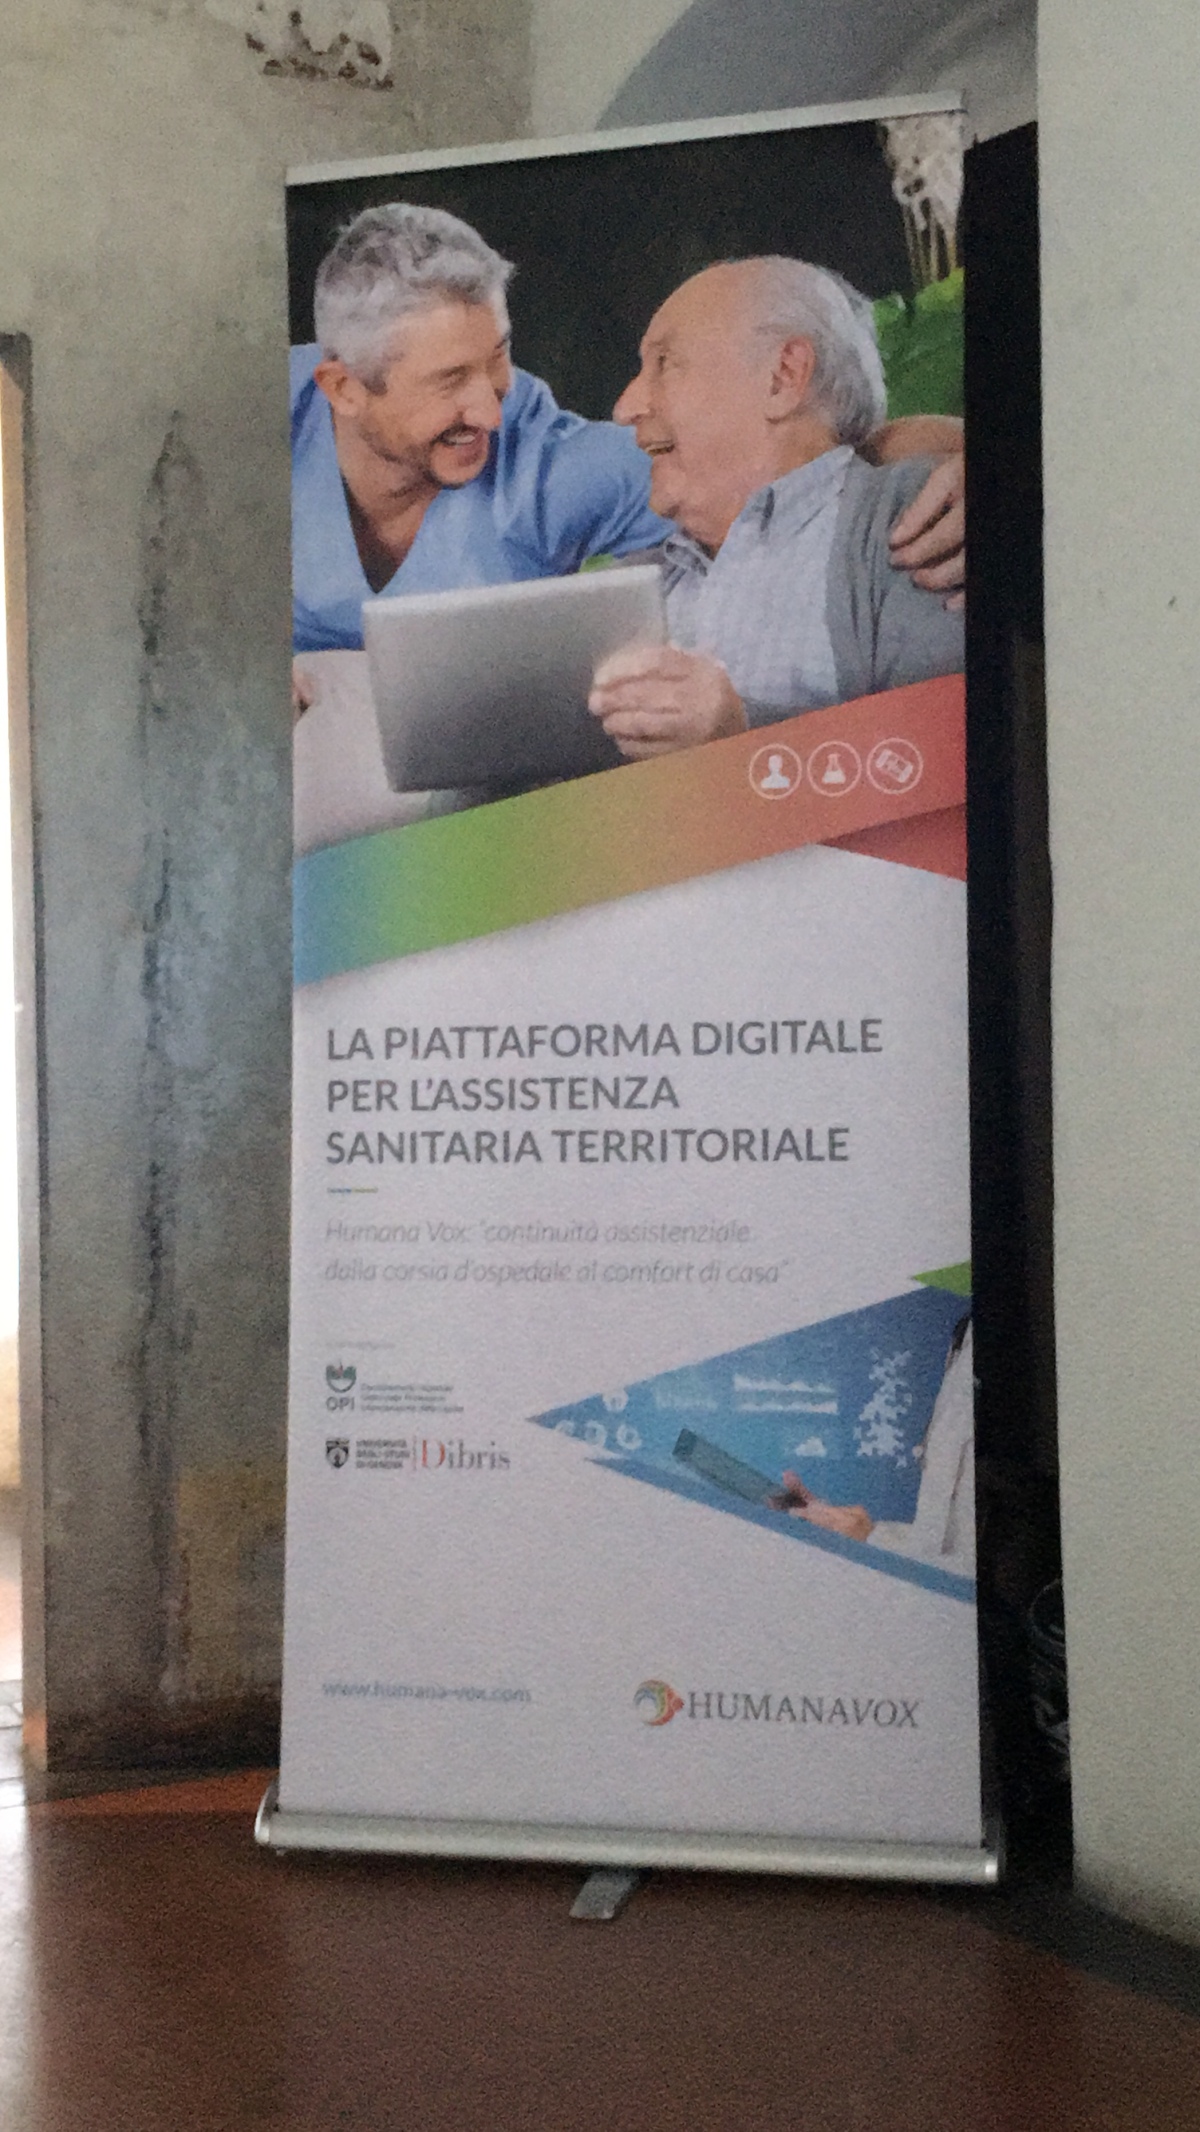 Technology for health, meeting in Genoa (I)